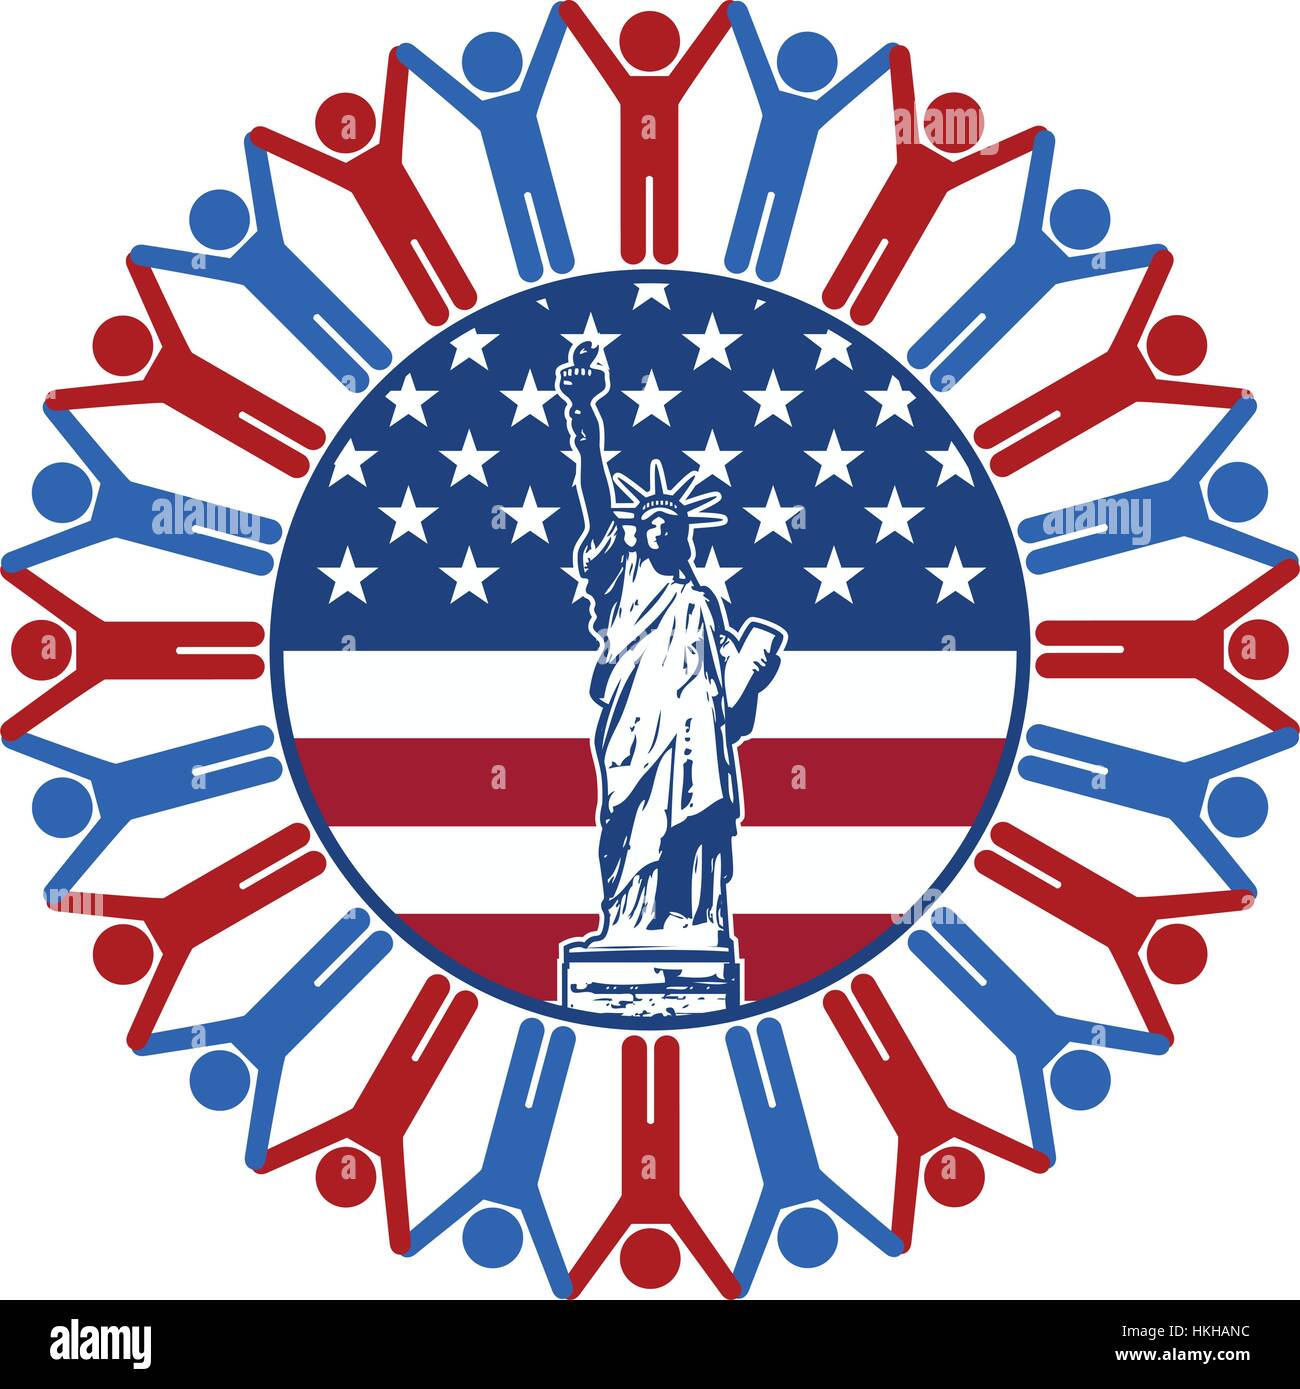 vector icon with flag of United States of America, statue of liberty, republican and democrat symbols of people Stock Vector